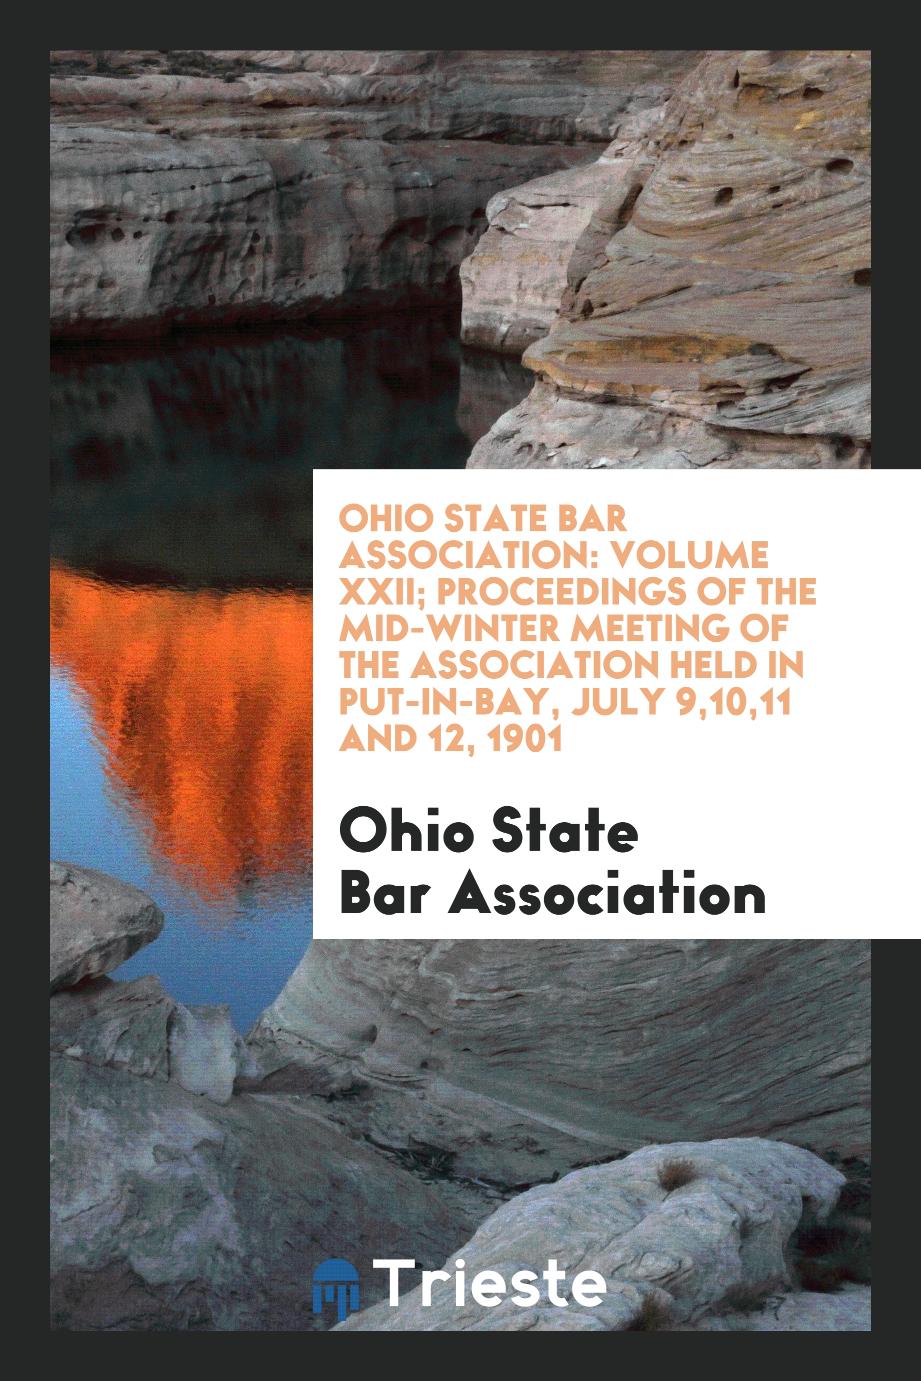 Ohio State Bar Association: Volume XXII; Proceedings of the Mid-Winter Meeting of the Association Held in Put-In-Bay, July 9,10,11 and 12, 1901